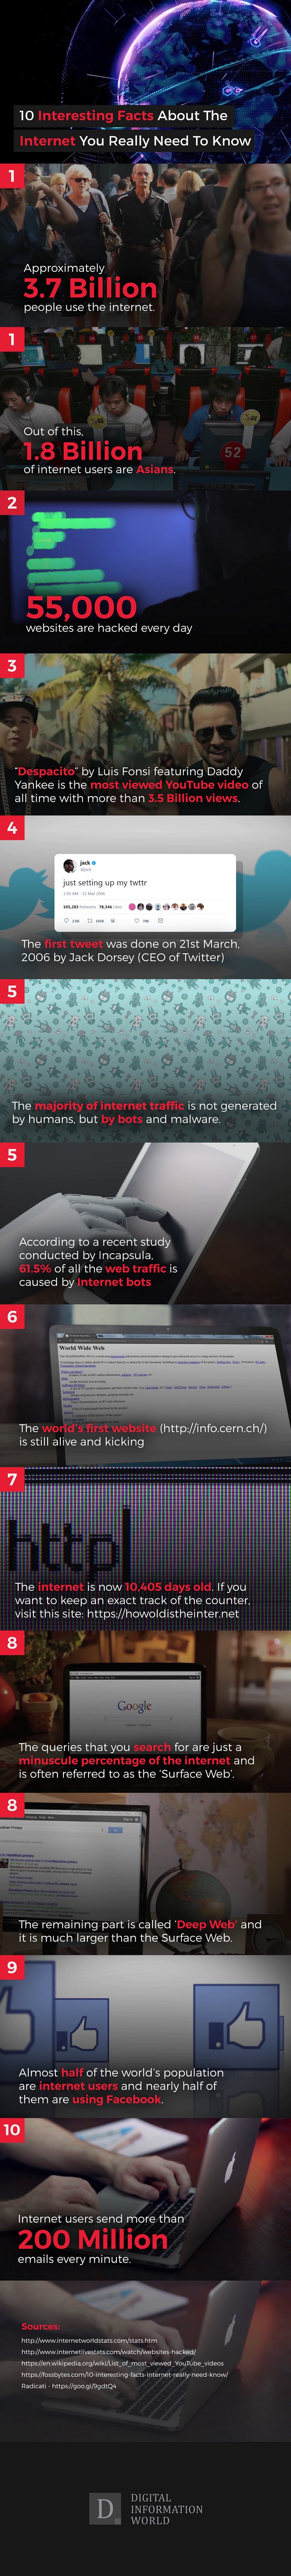 10 Fascinating Facts About The Internet Infographic